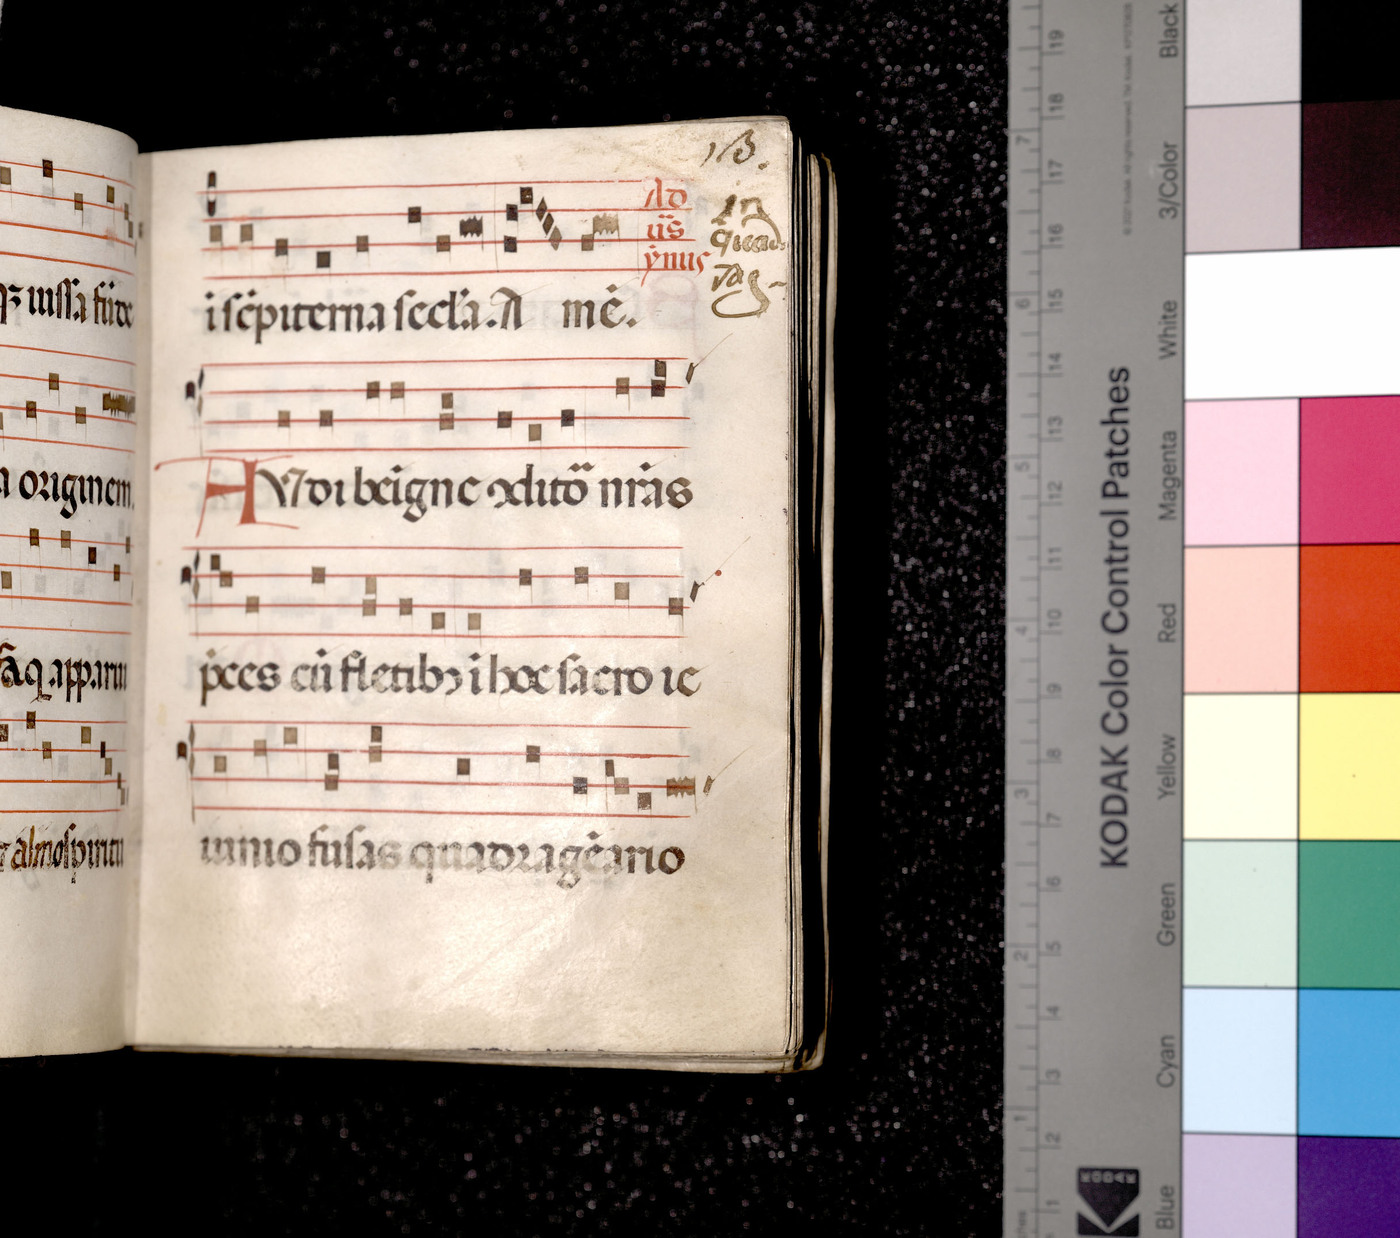 A right page of the Noted Hymnal beside the Kodak Color Control Patches.